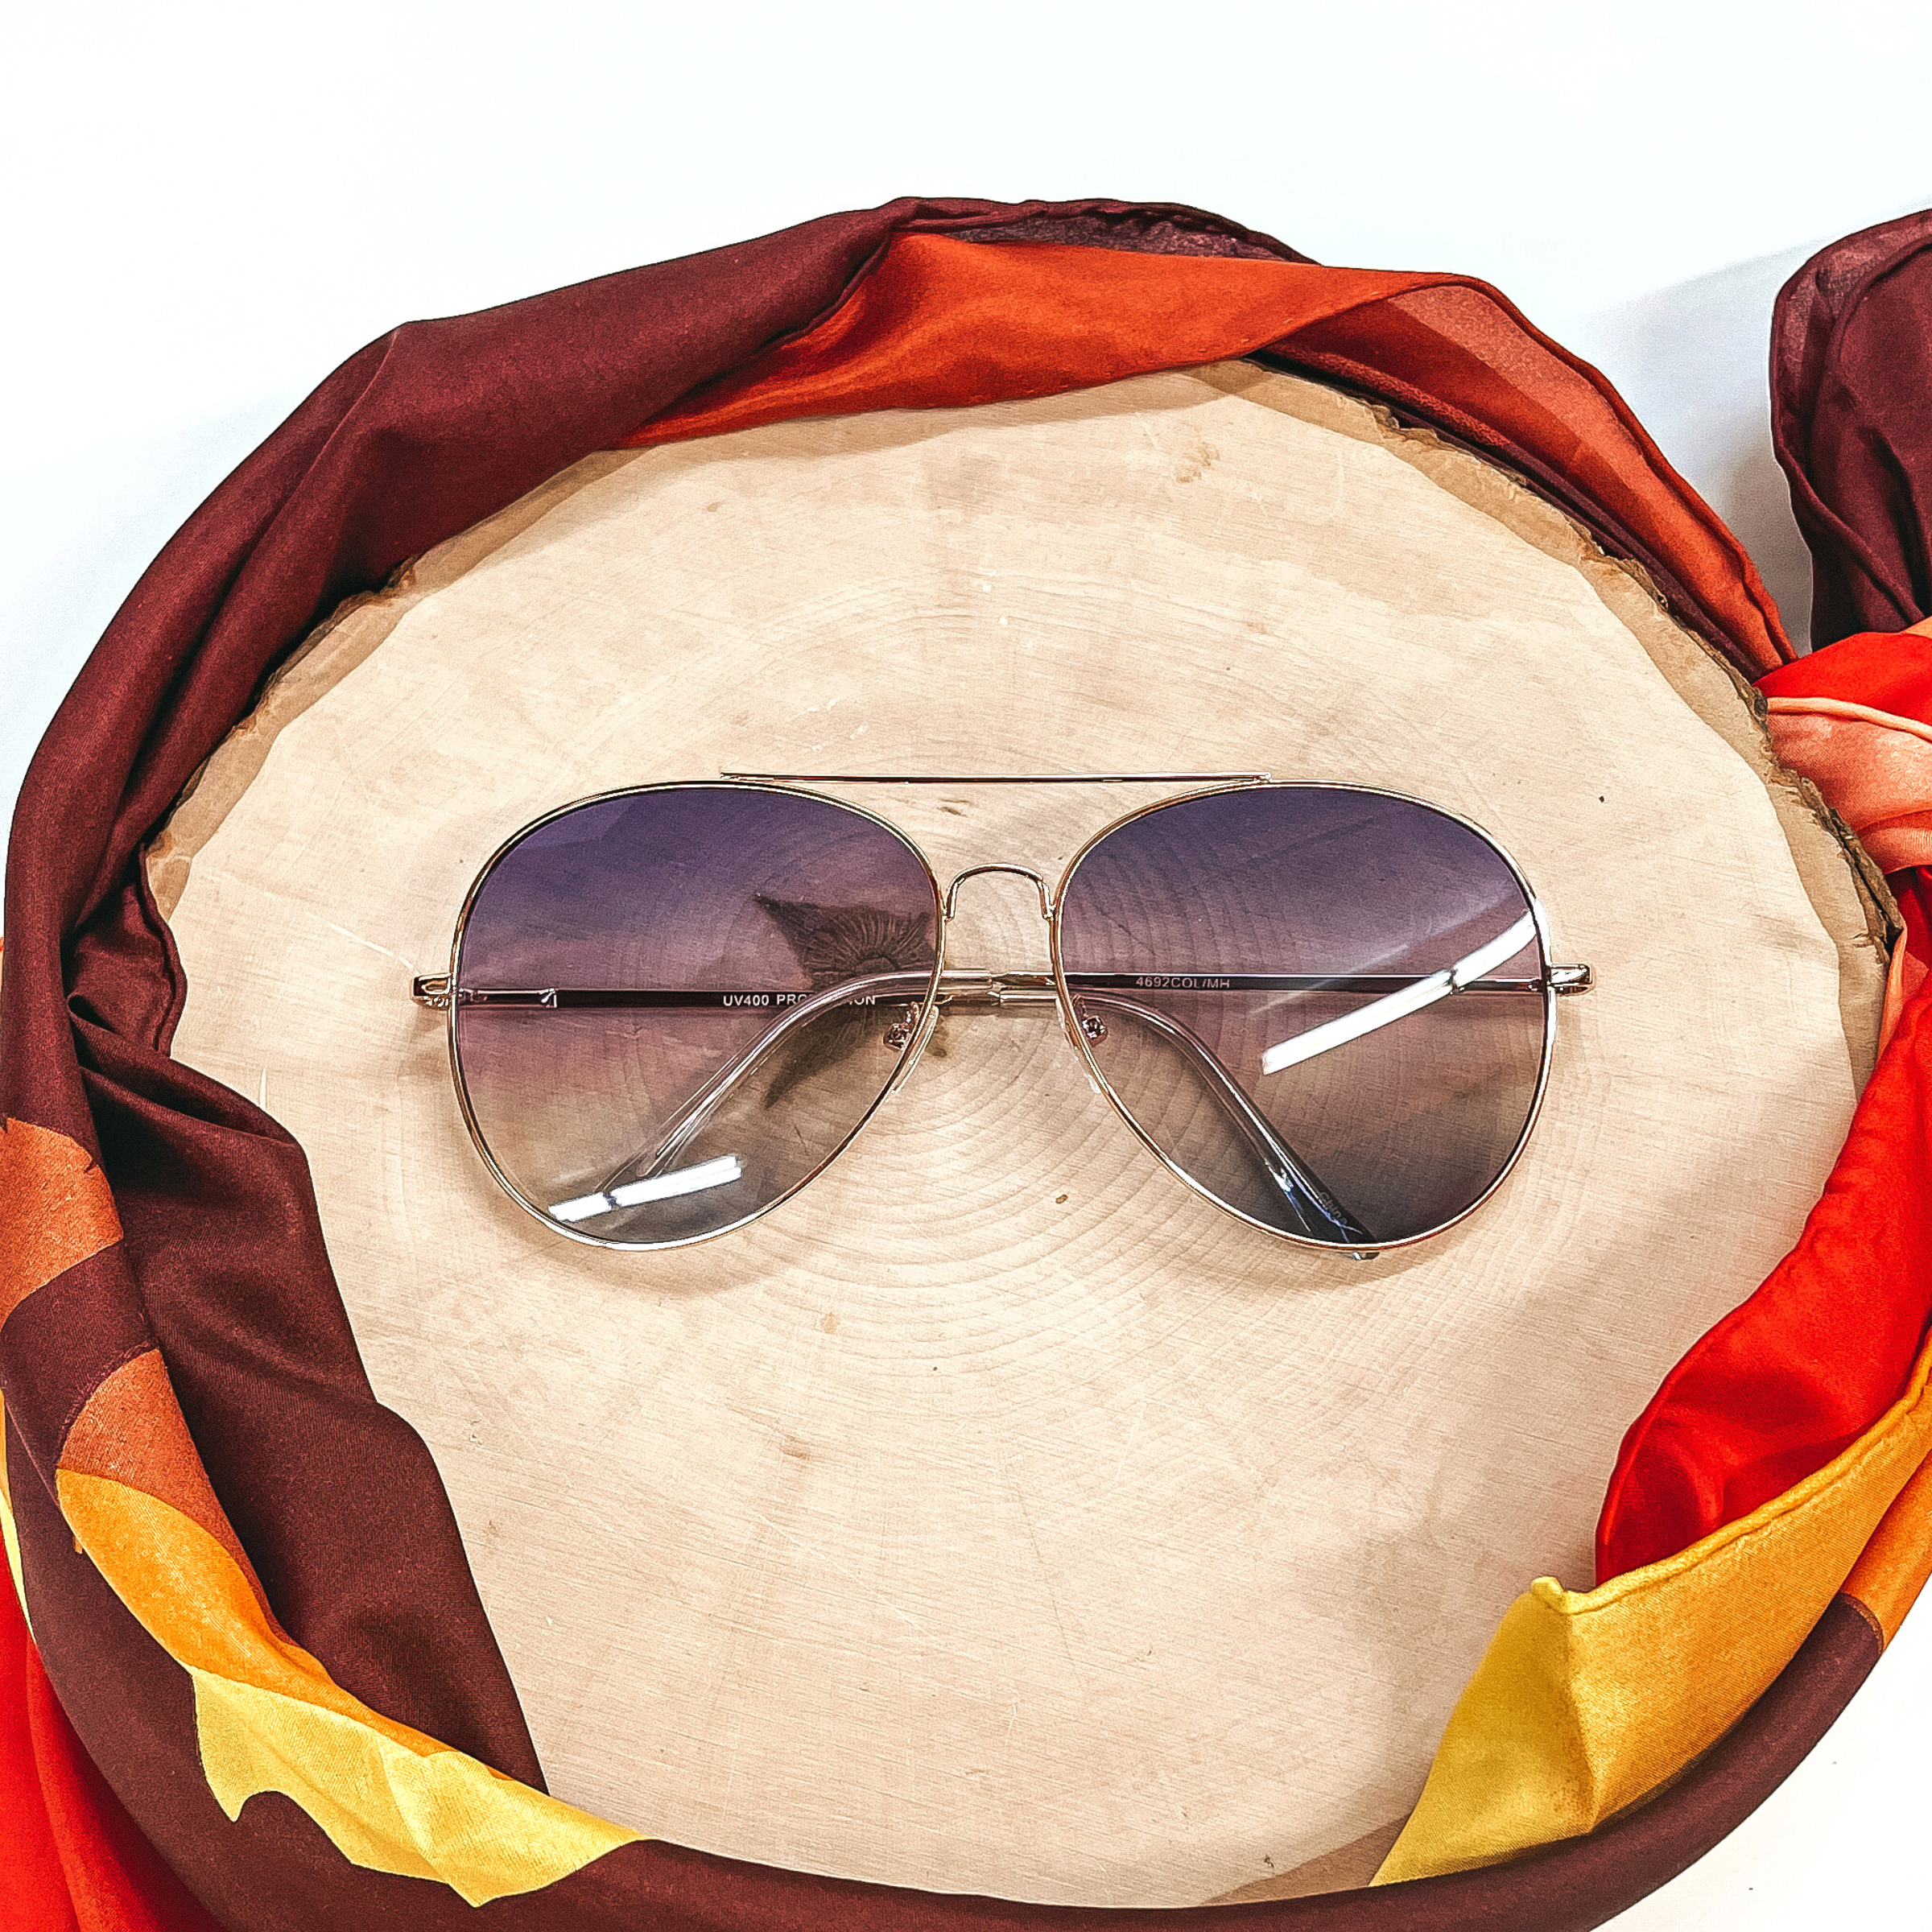 These are aviator style sunglasses with dark purple and dark blue gradient  lenses and a gold tone outline/frame.  These sunglasses are taken on top of a wooden slate and a white background.  There is a brown,orange, and yellow wild rag around the wooden slate as decor.